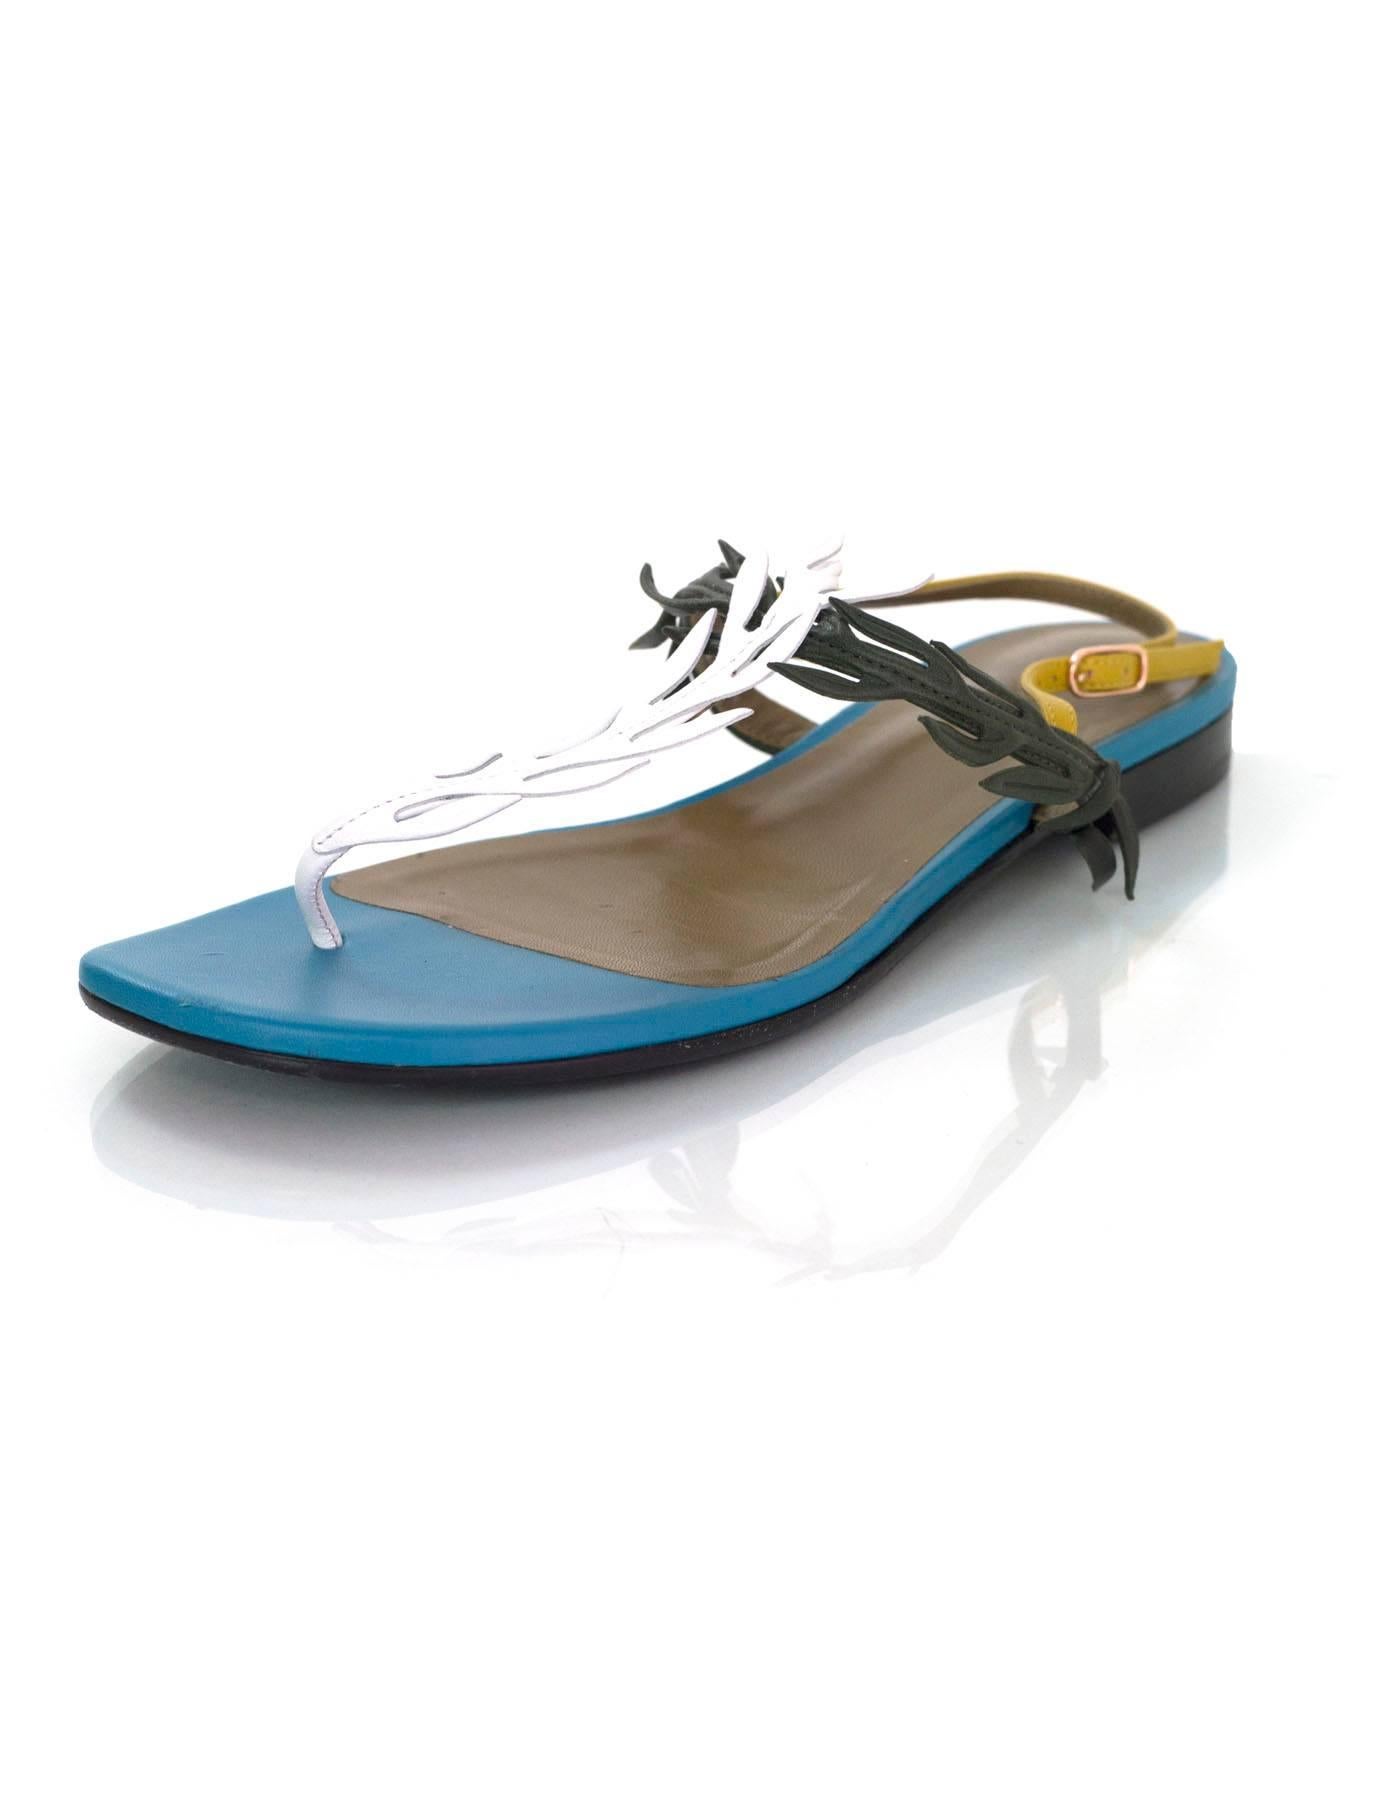 Hermes '16 Multi-Colored Leather Myrthe Sandals
Features leaf-like details to straps

Made In: Italy
Color: Teal, army green, white and mustard yellow
Materials: Leather
Closure/Opening: Ankle strap with buckle and notch closure
Sole Stamp: Hermes